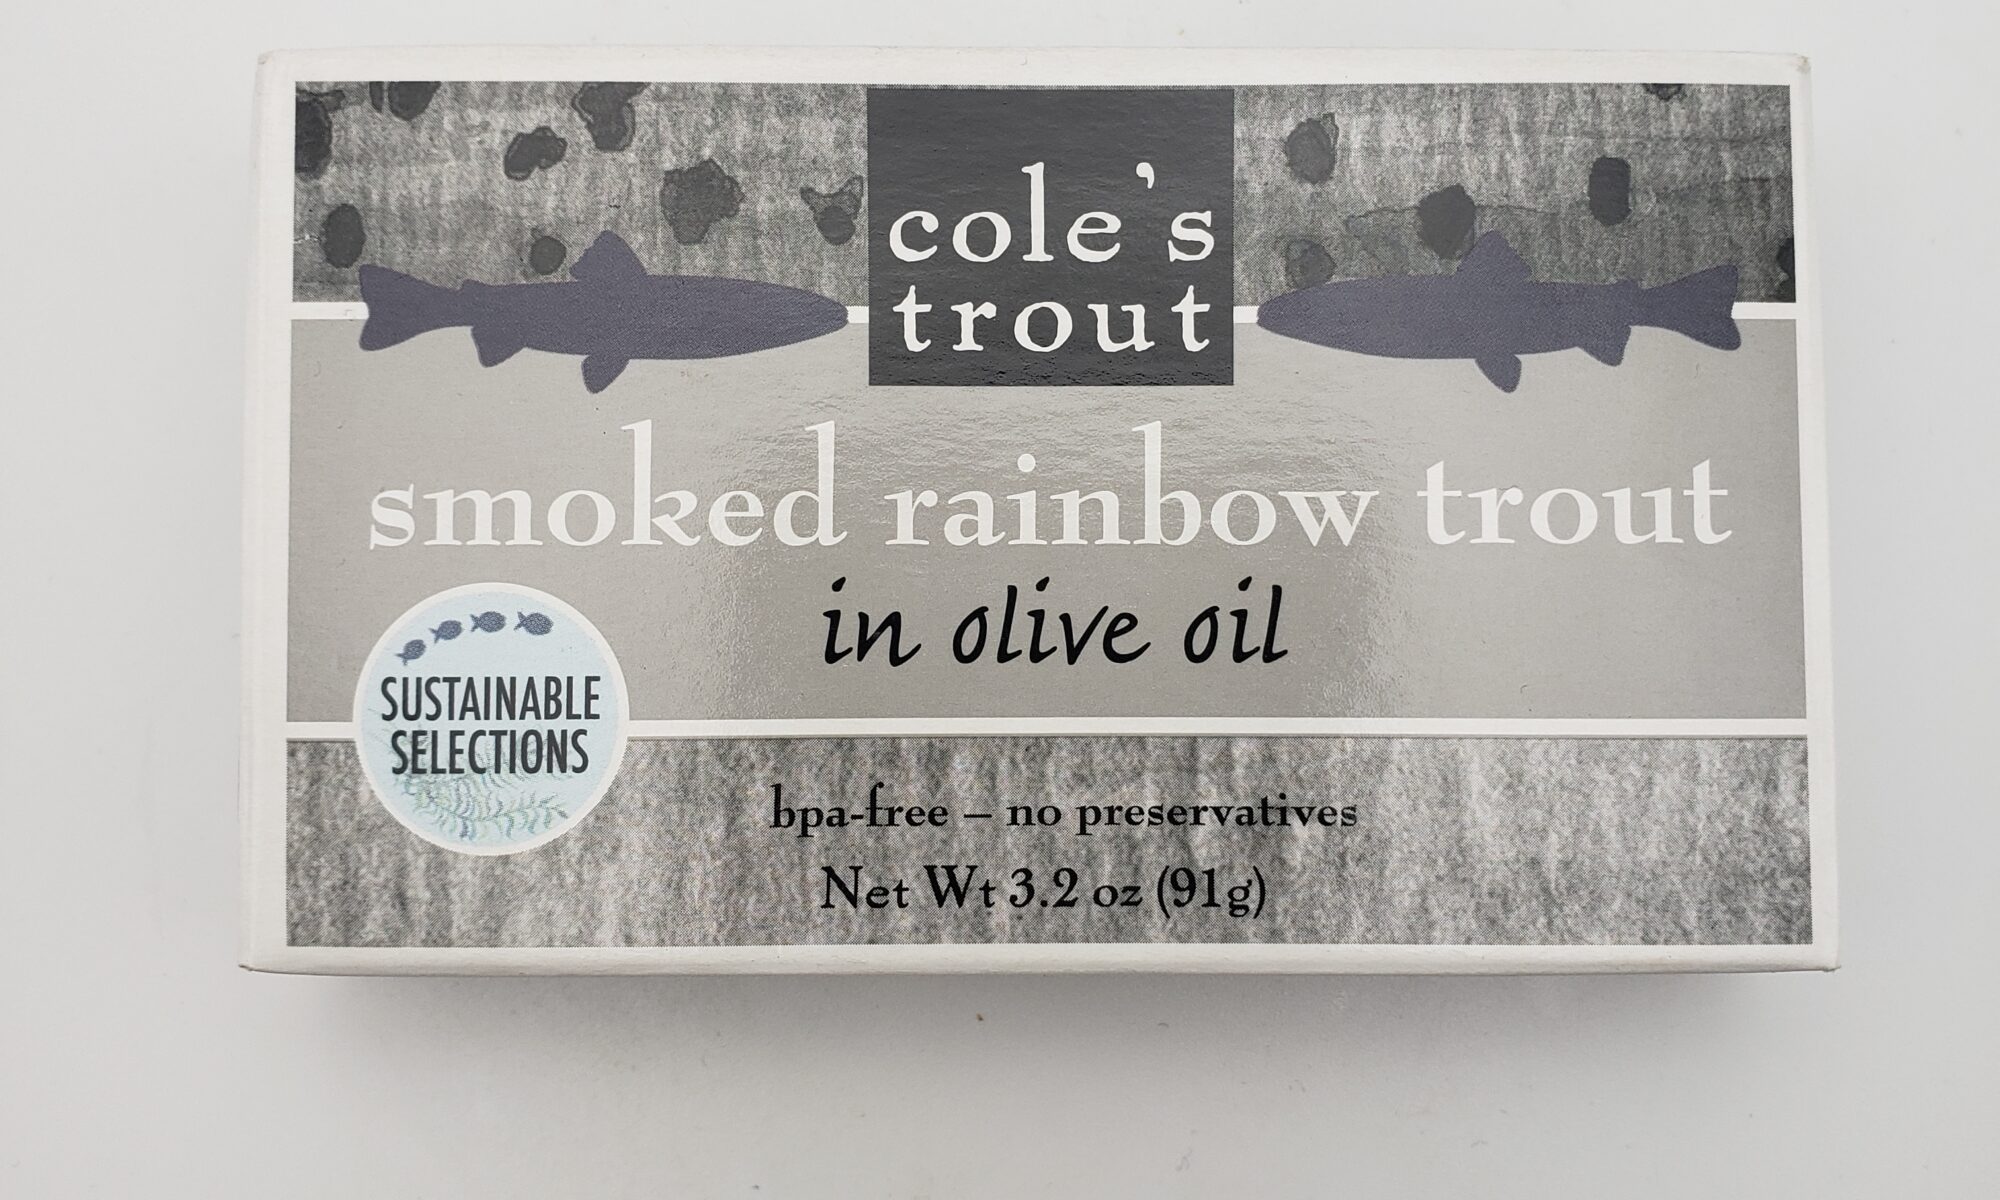 Image of Cole's smoked rainbow trout box